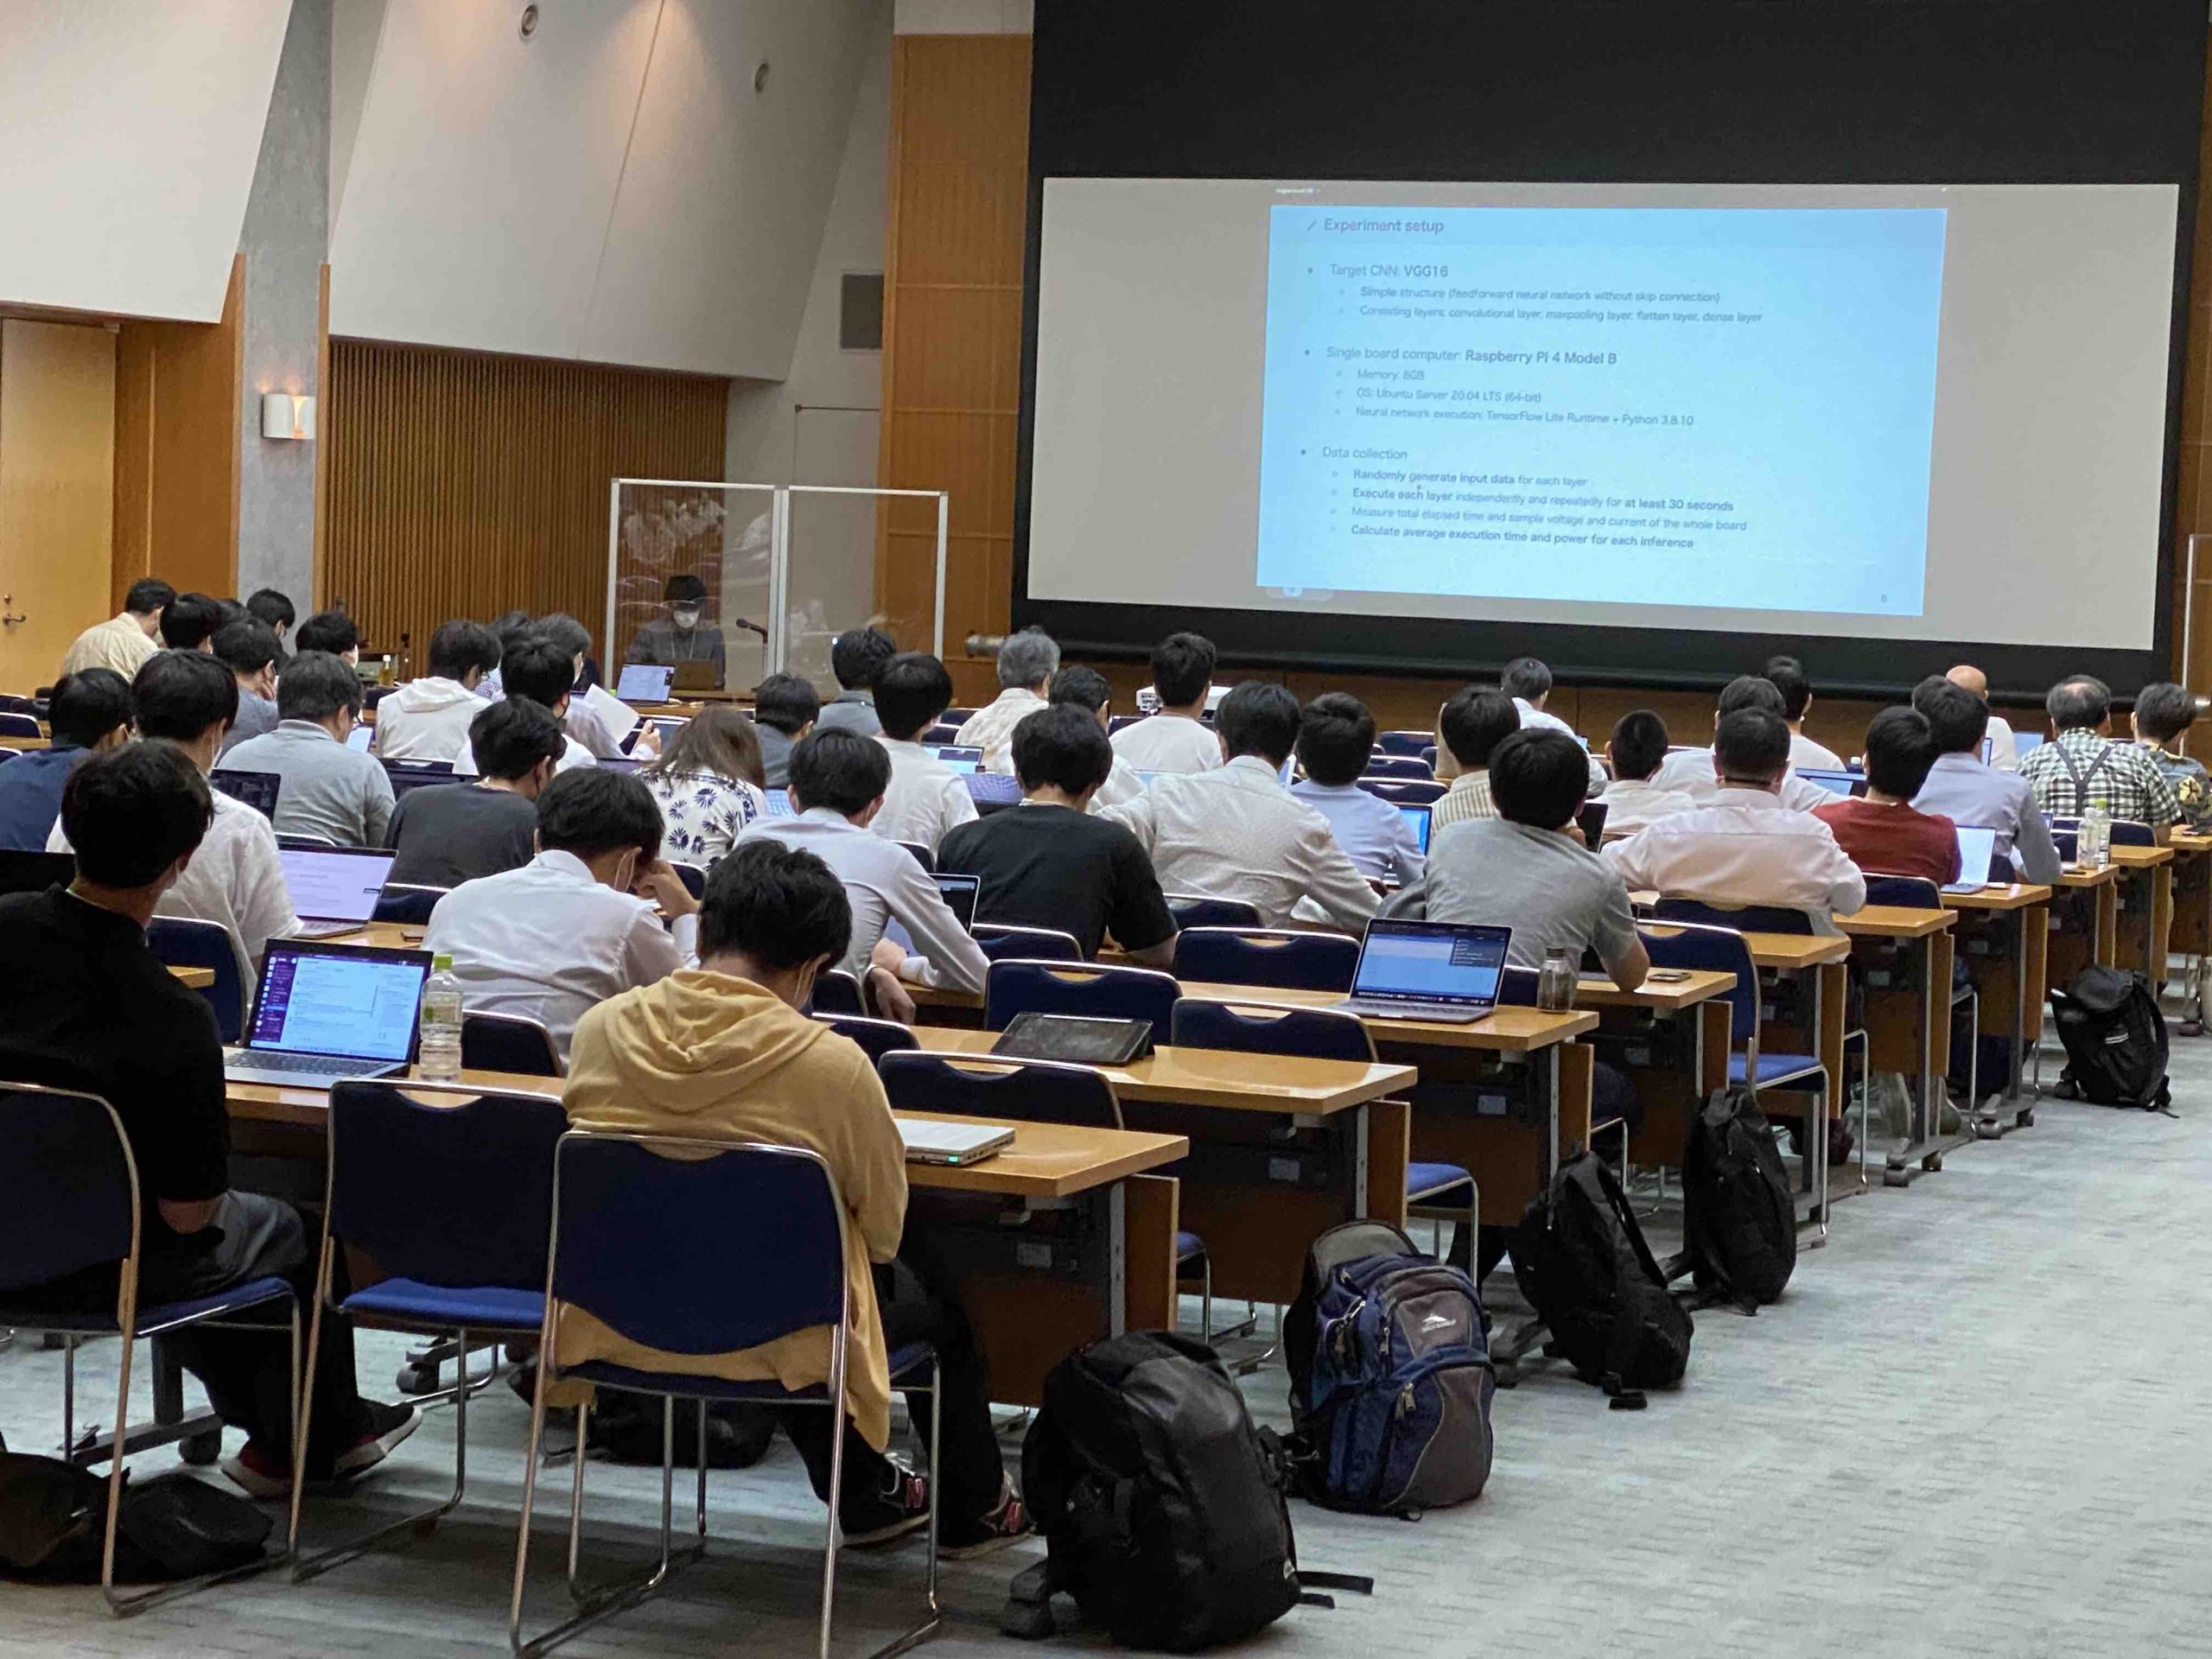 Kuan gave a talk for our edge computing research in xSIG. [K. Y. Ng et al., Layer-wise power/performance analysis for single-board CNN inference]